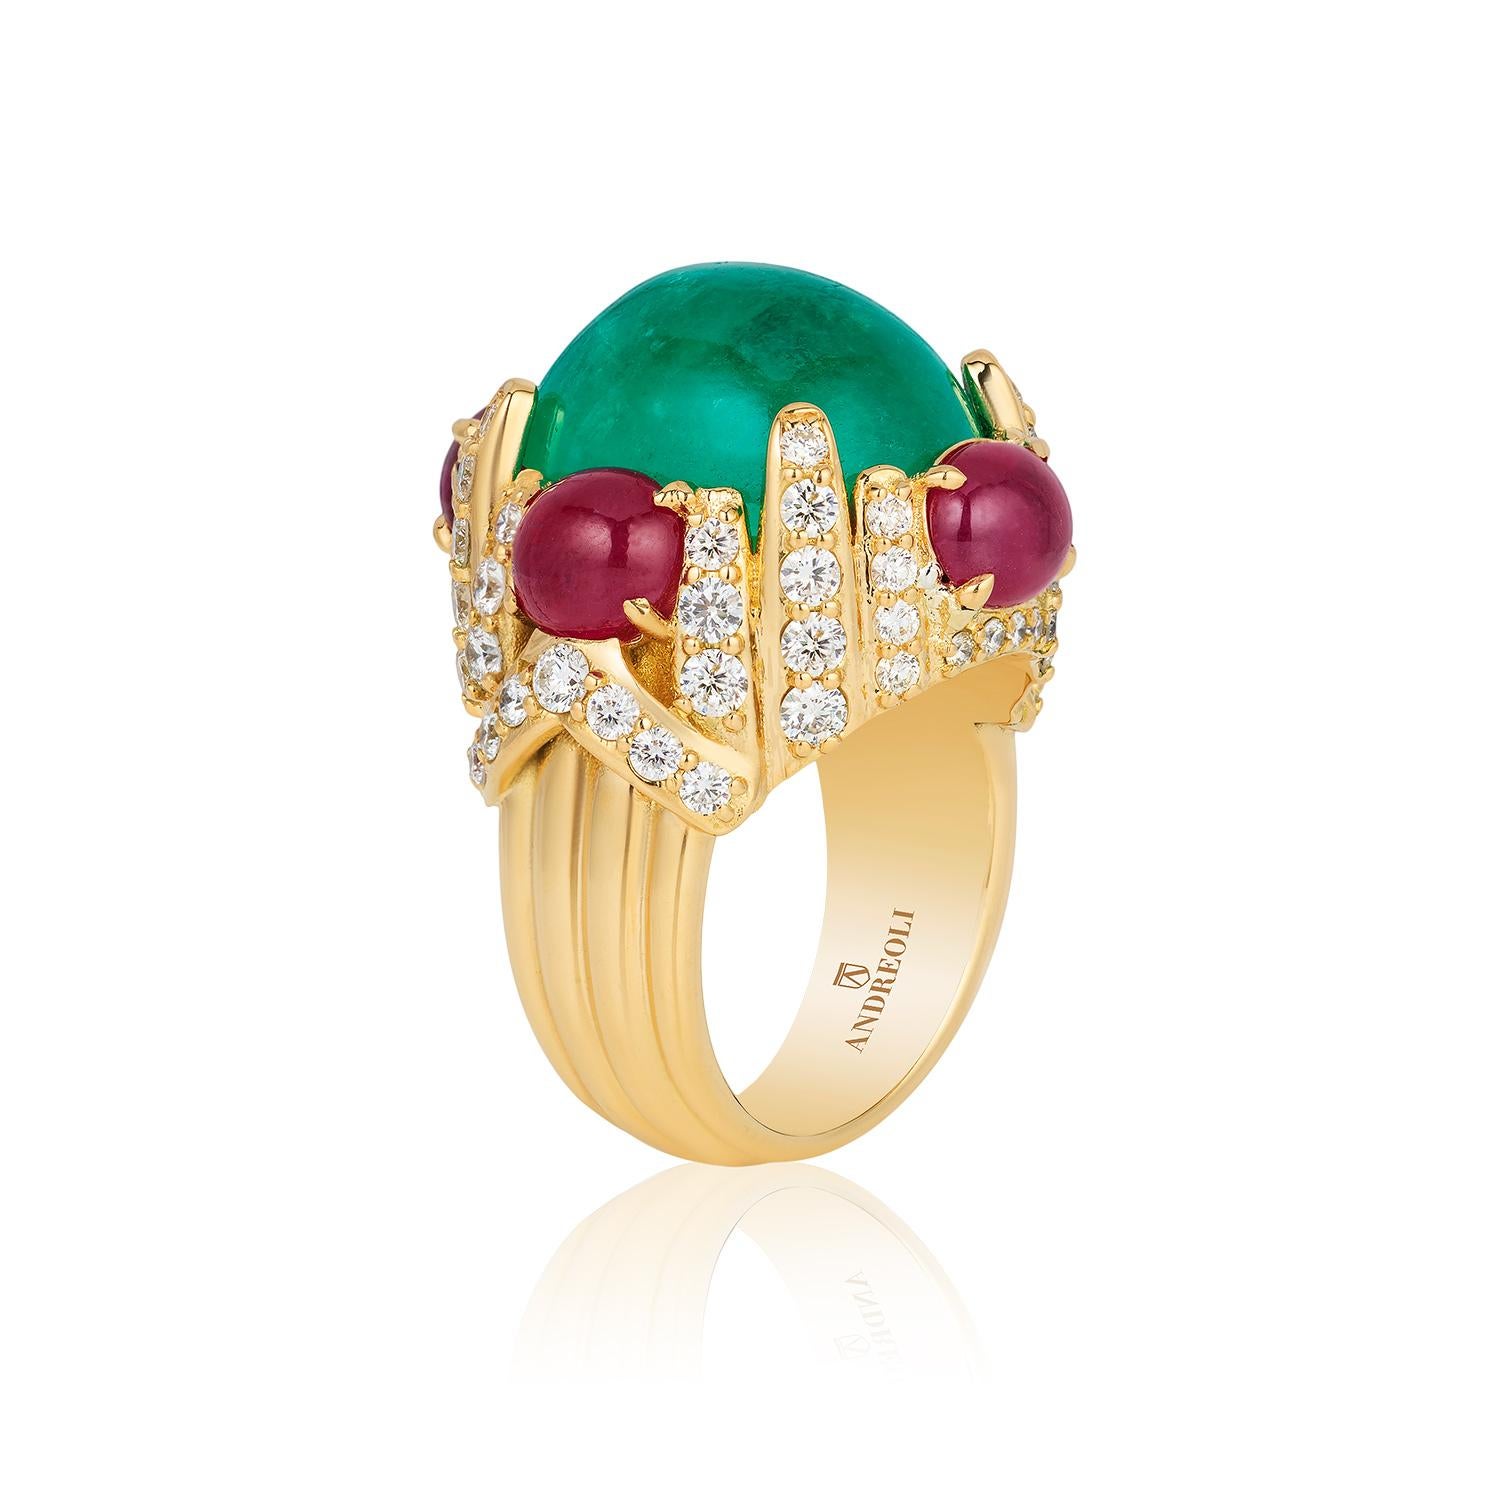 Andreoli 14.53 Carat Colombian Emerald Ruby Diamond 18 Karat Yellow Gold Ring

This ring features:
- 1.90 Carat Diamond
- 4.85 Carat Ruby
- 14.53 Carat Emerald Colombian Certified
- 30.41 Gram 18K Yellow Gold
- Made In Italy